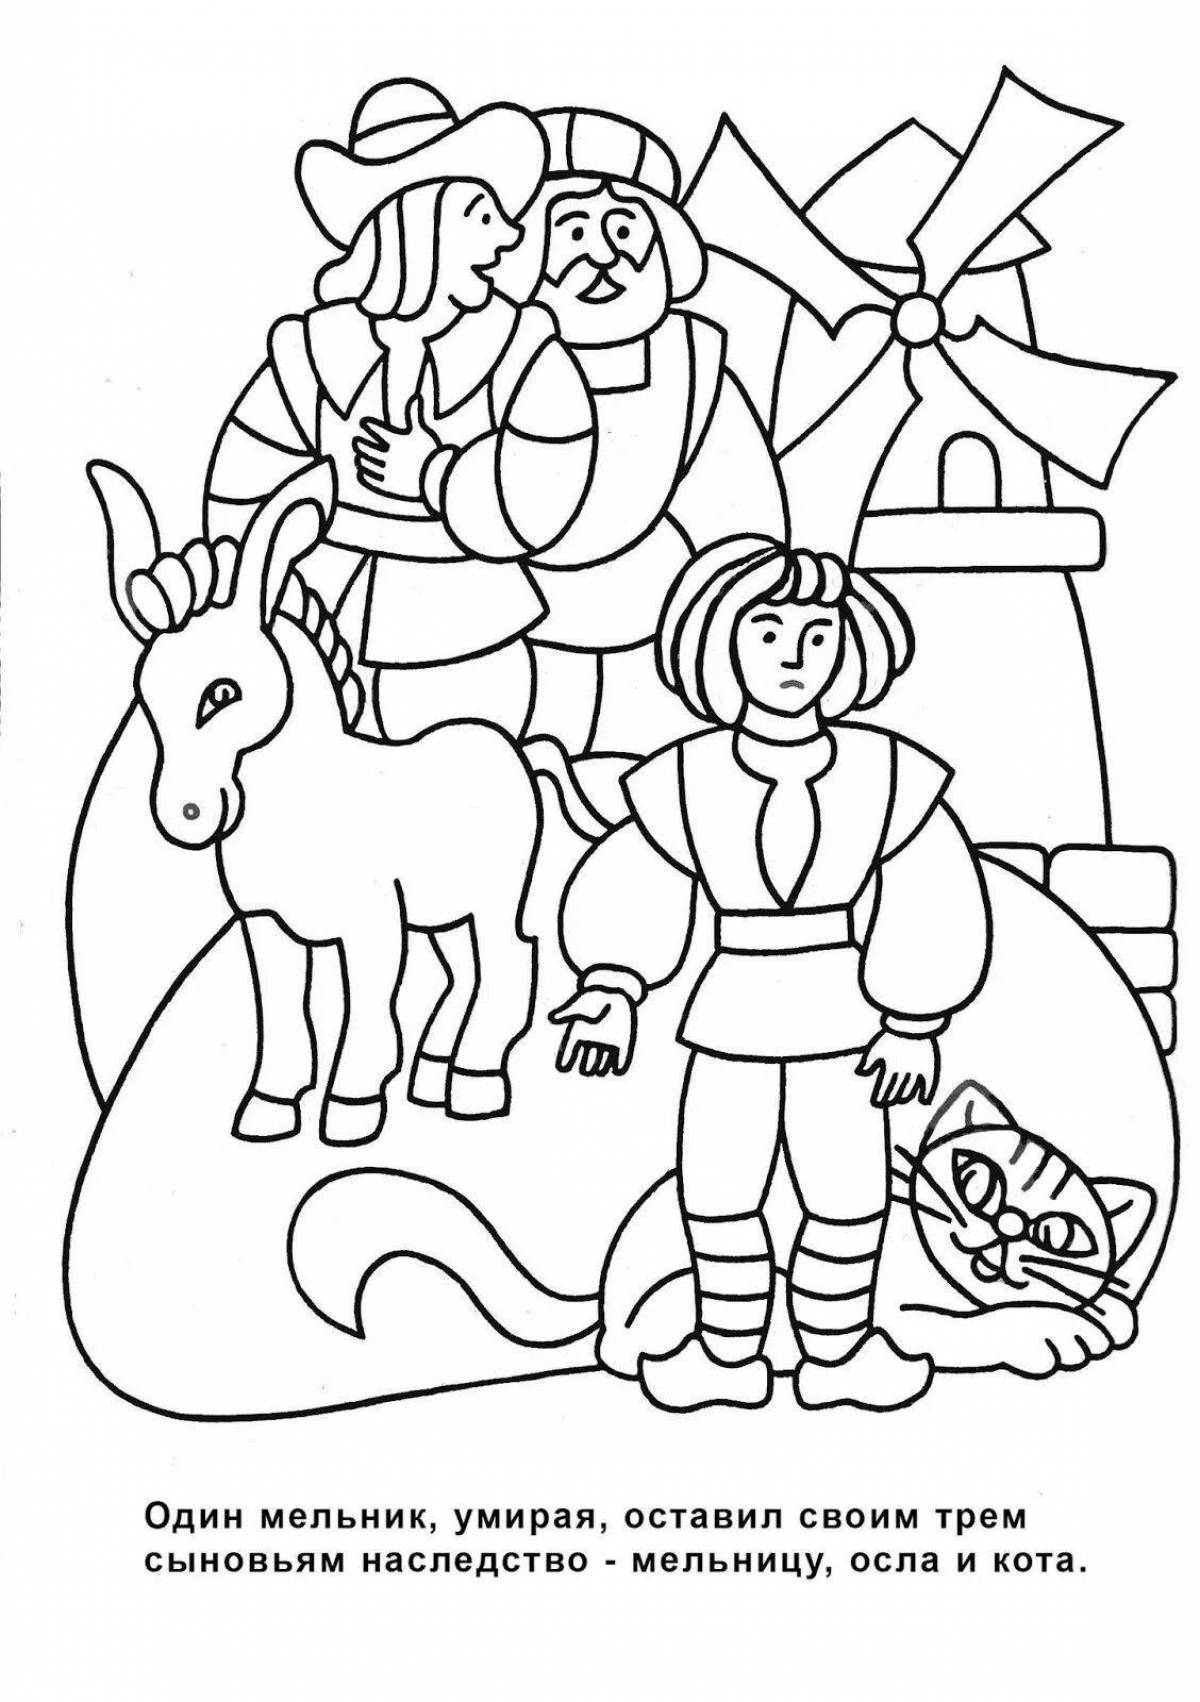 Exotic coloring book from perrault's tales